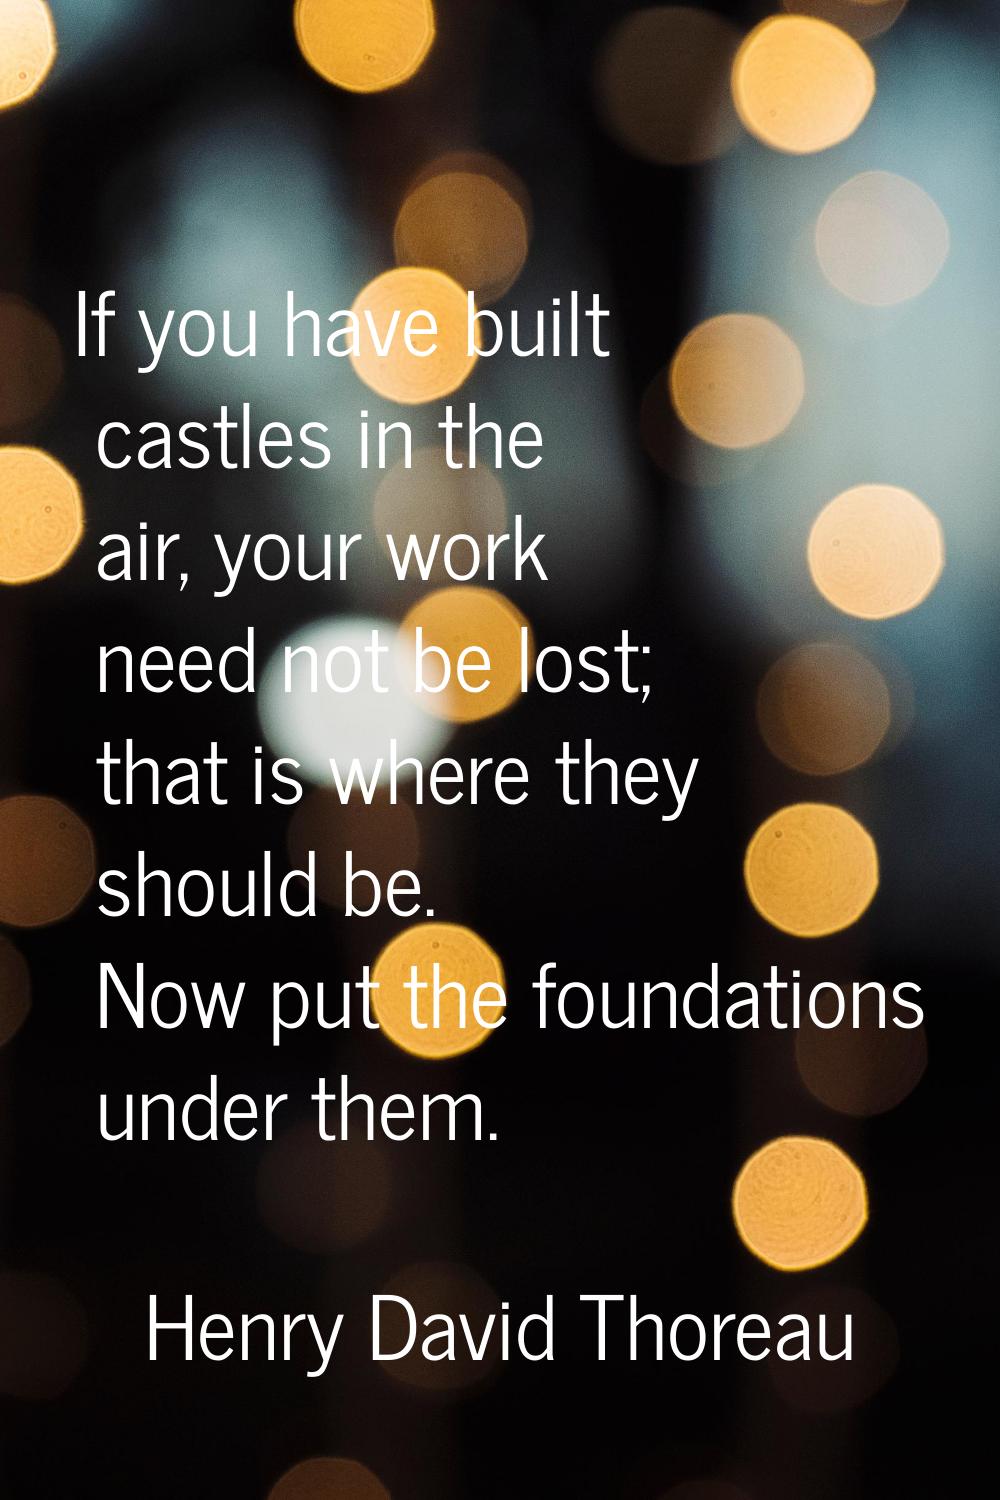 If you have built castles in the air, your work need not be lost; that is where they should be. Now